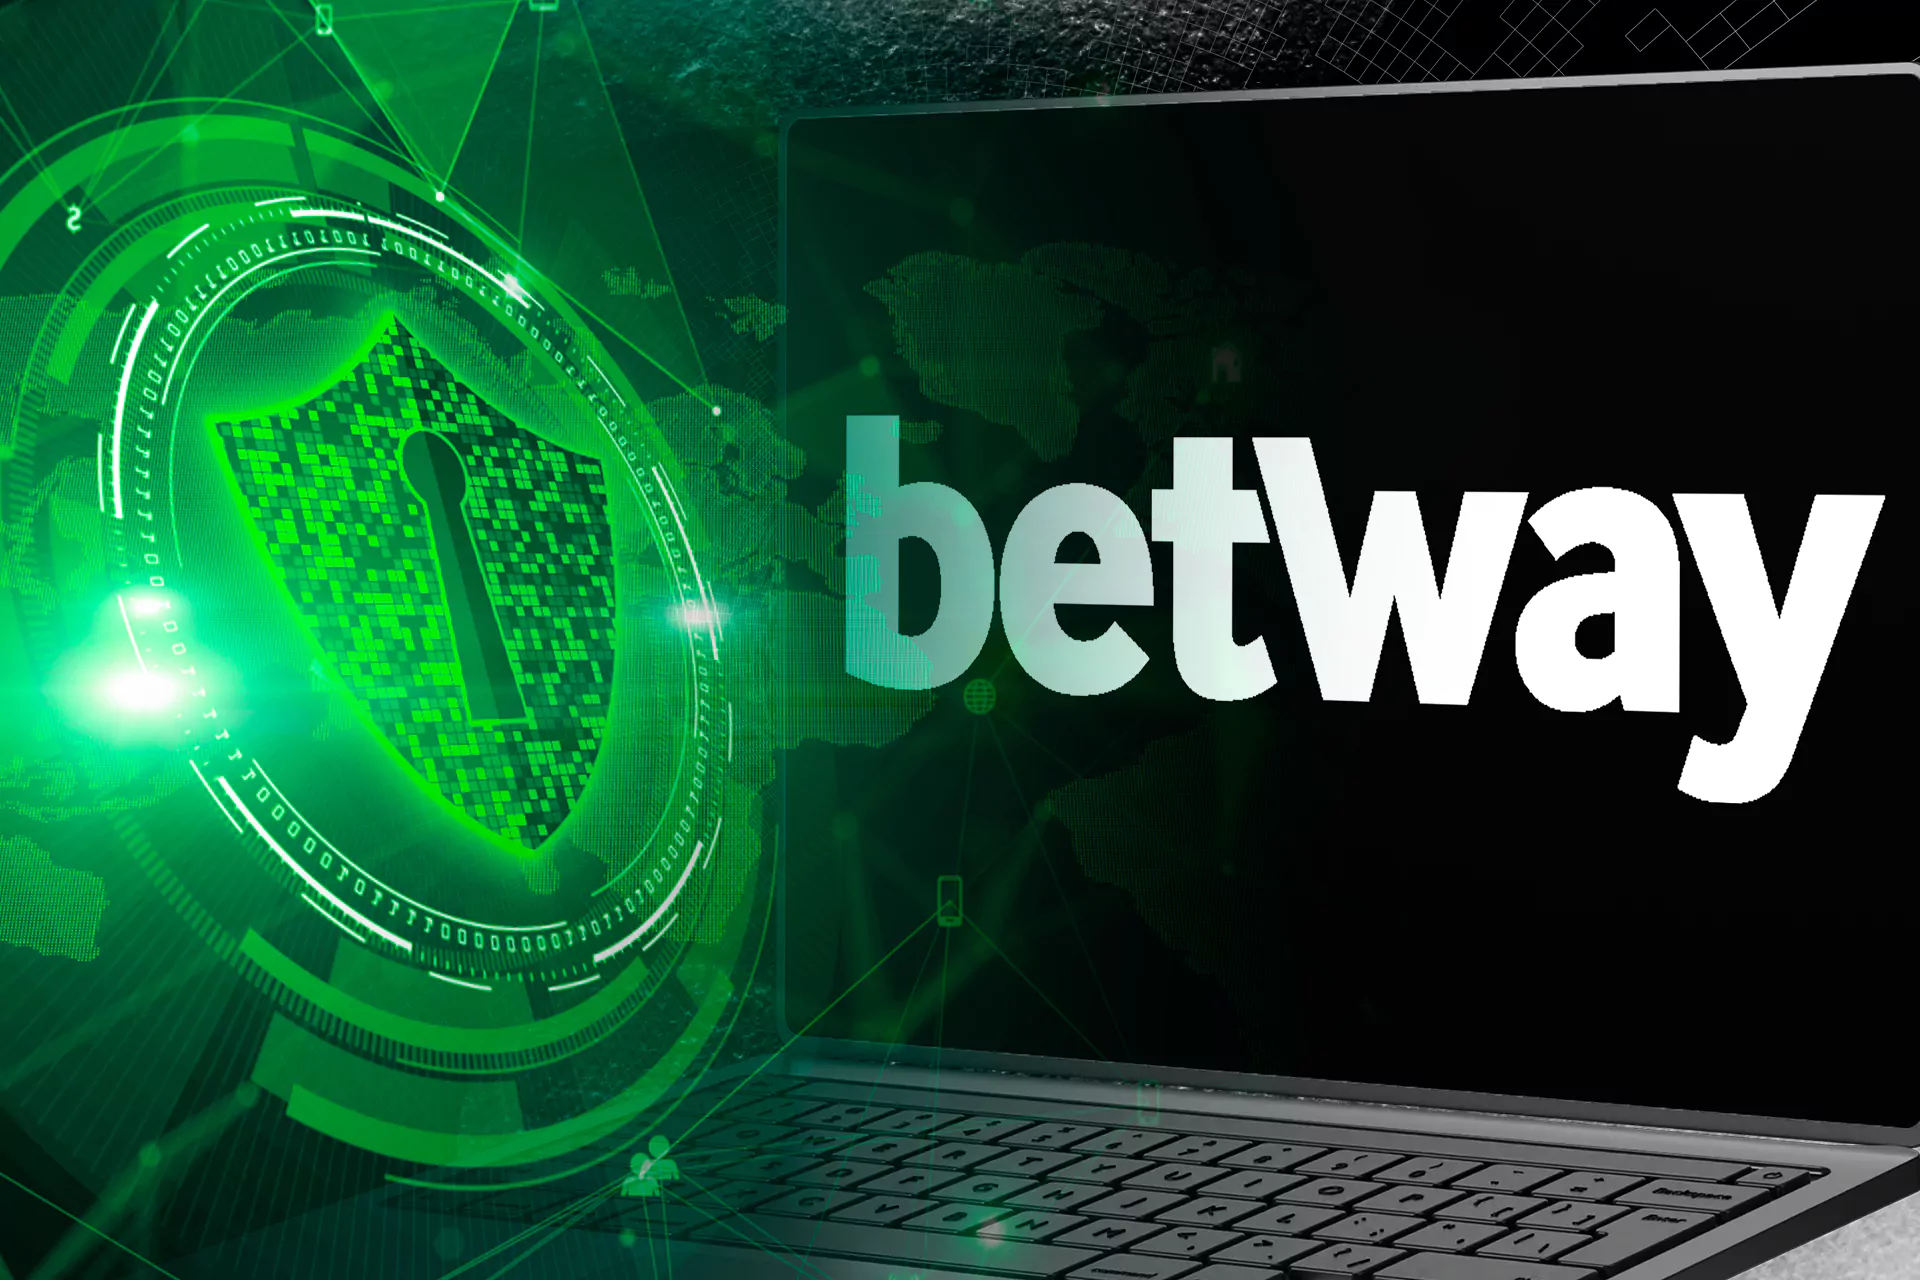 Betway cares about your personal data and protects it strongly.